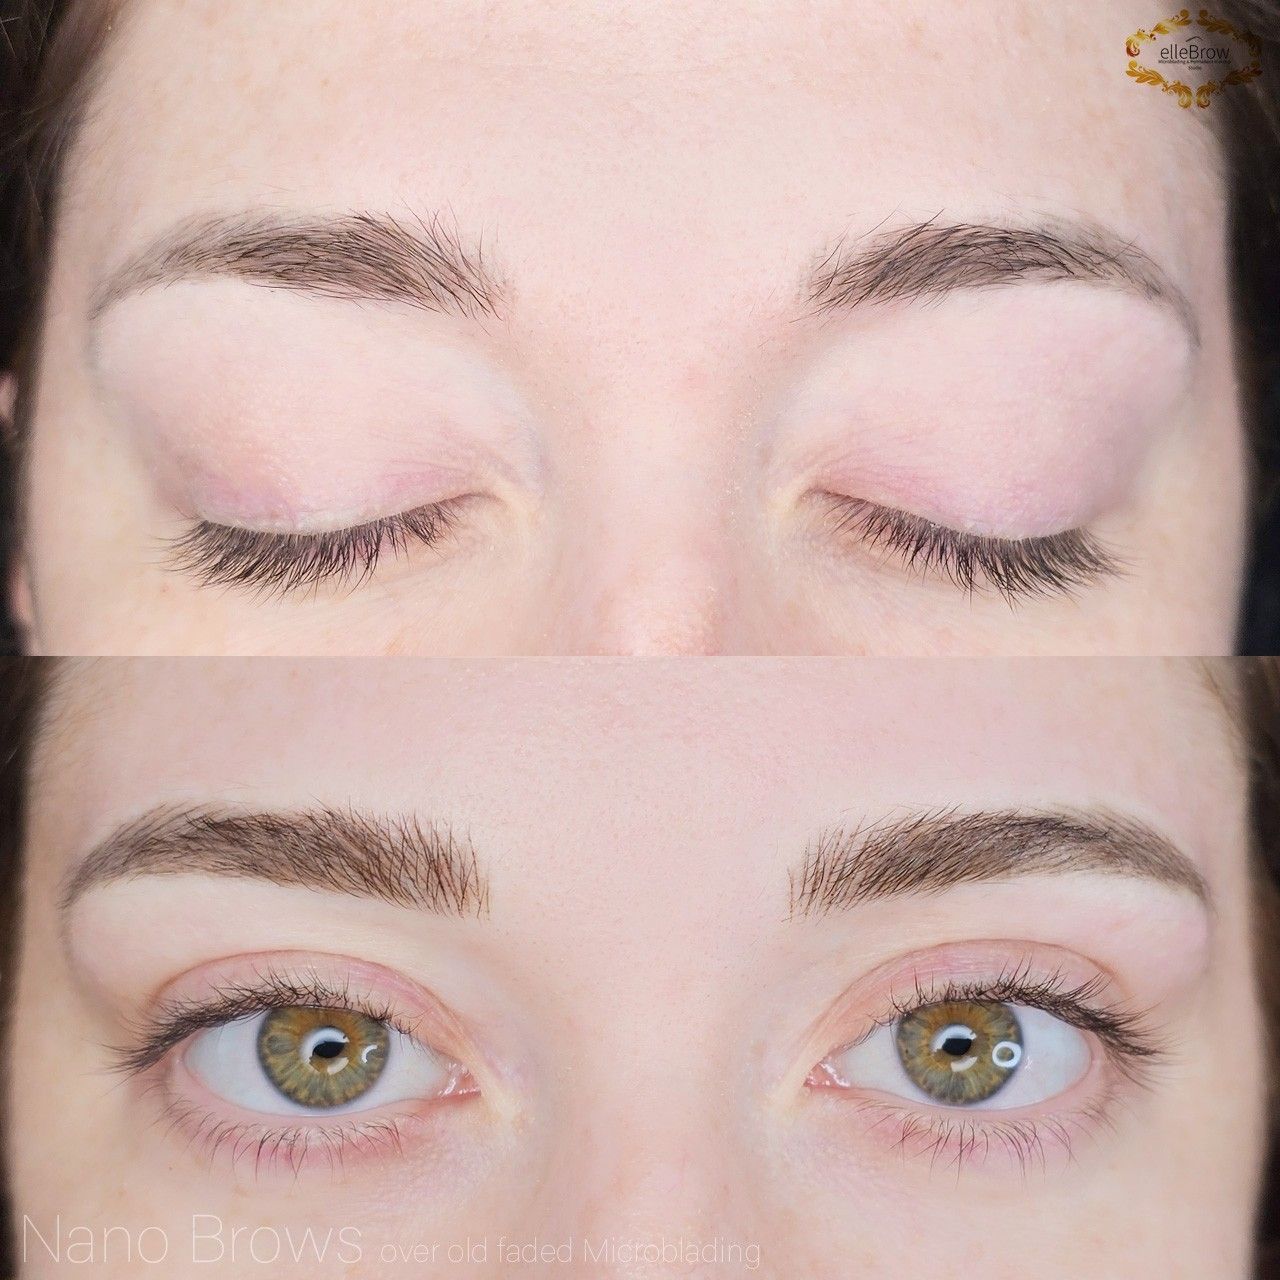 Old Faded Microblading Before with New Nano Brows After